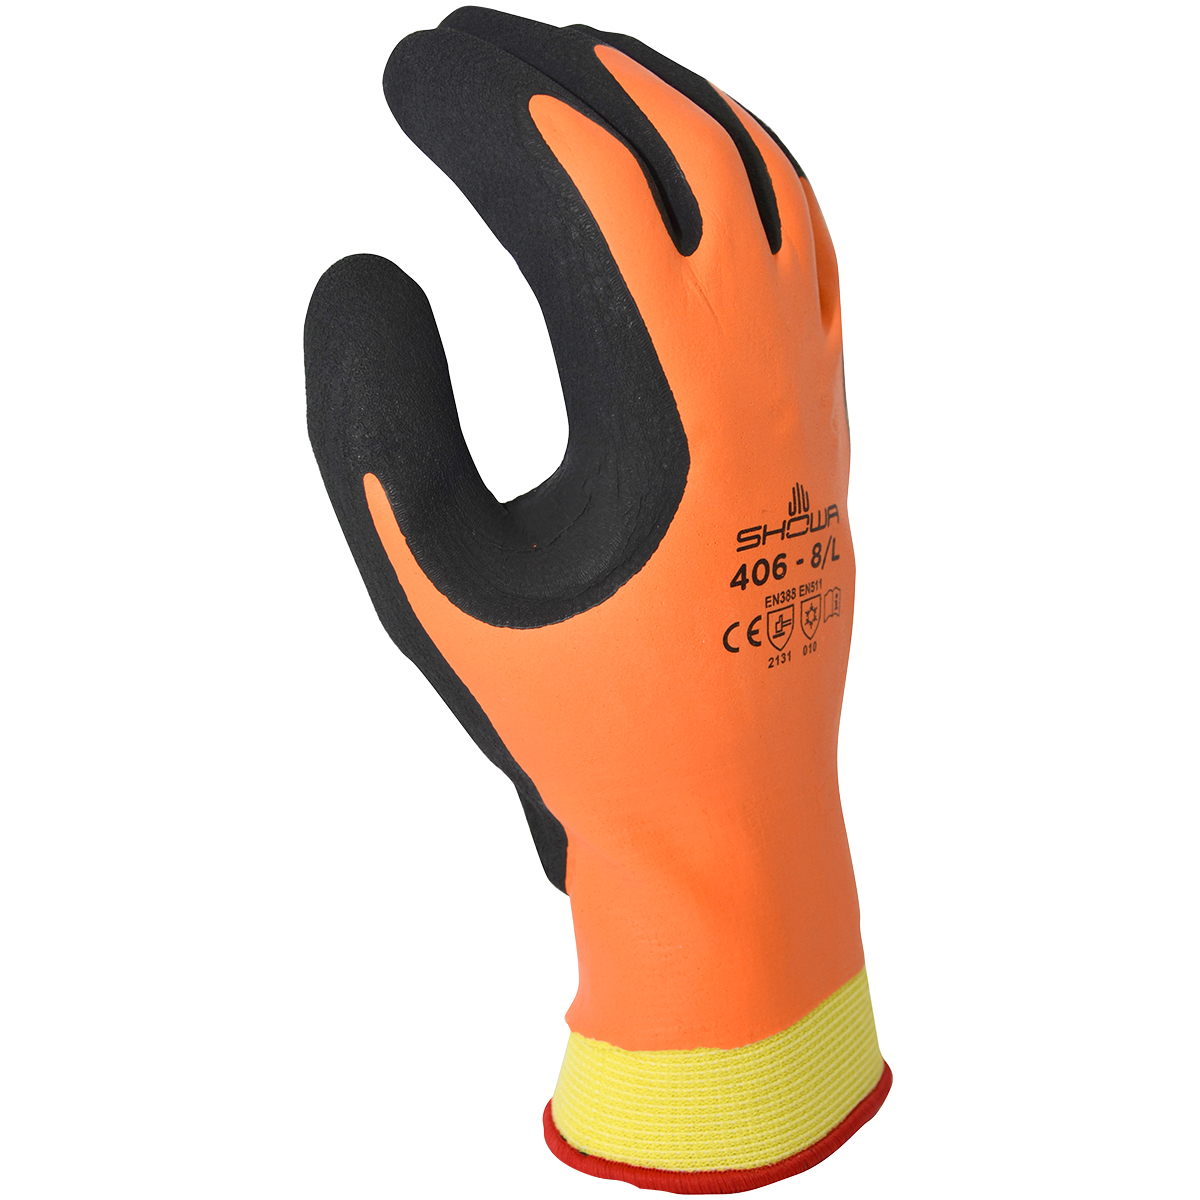 General purpose, dual natural rubber palm coating, acrylic nylon polyester insulated seamless liner, orange w/black coating, rough finish, extra extra large